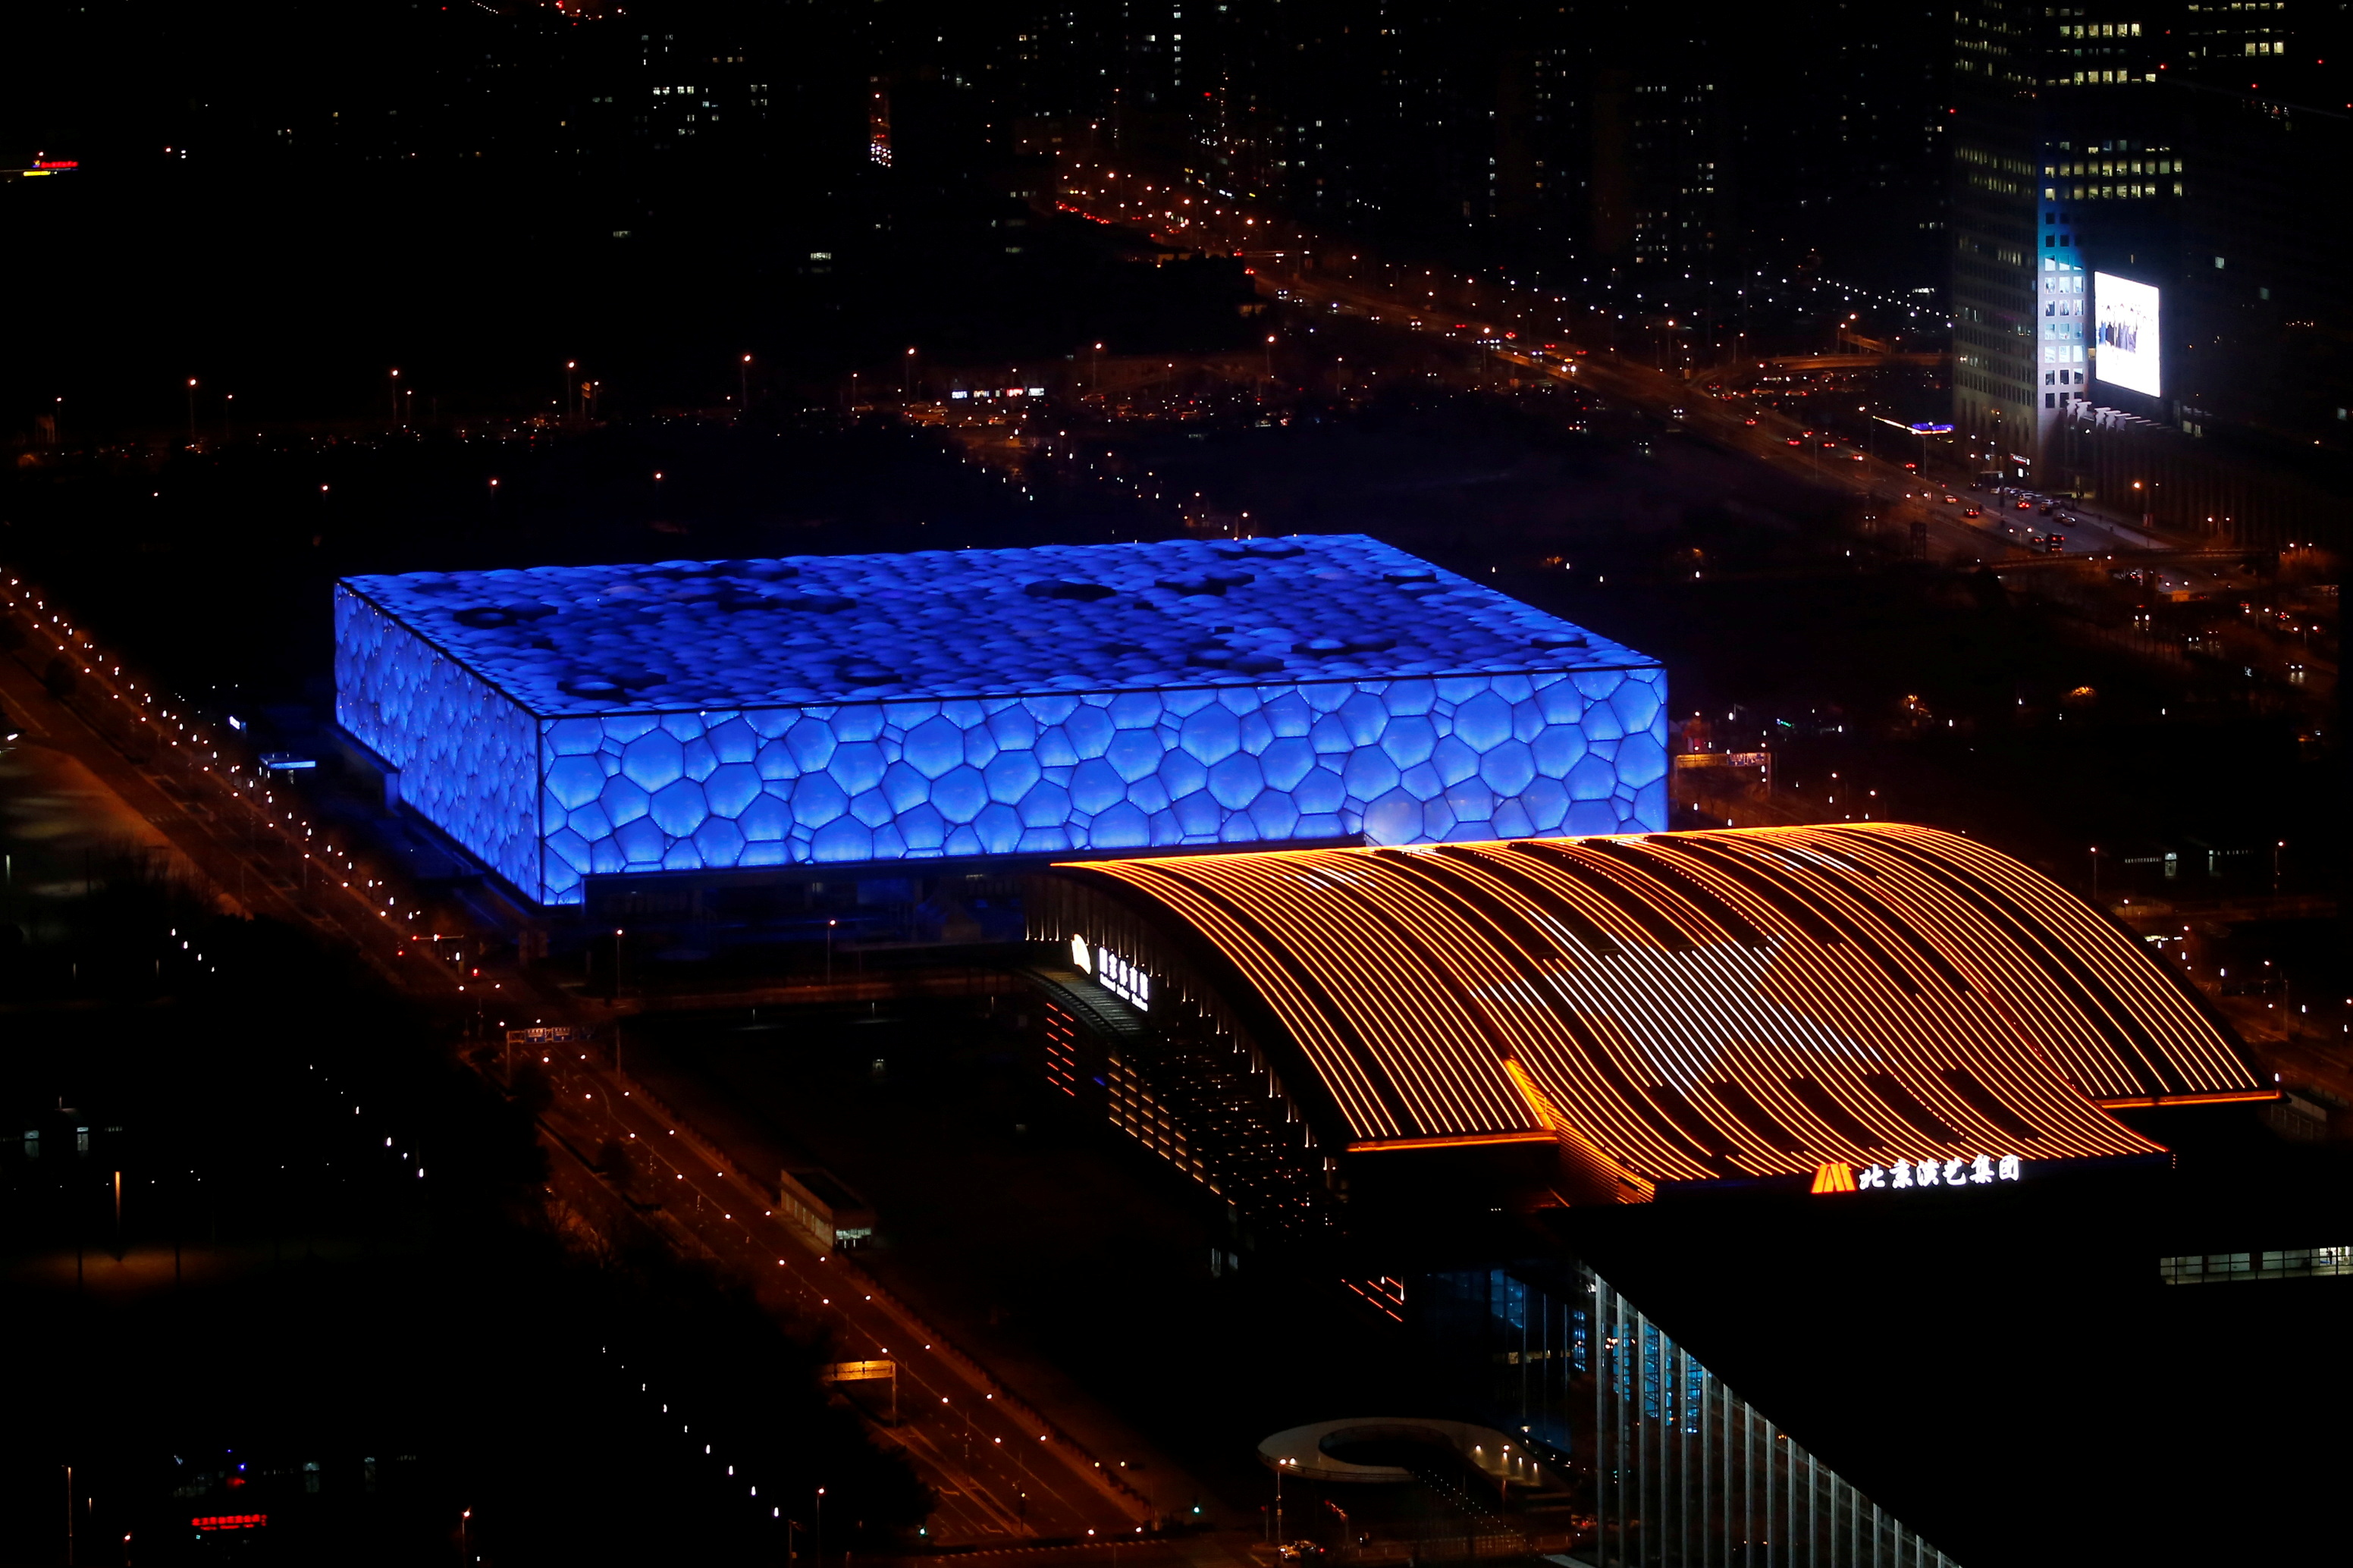 FILE PHOTO: National Aquatics Center, known colloquially as the "Water Cube", is seen next to a building lit up with an image of Chinese national flag, a year ahead of the opening of the the 2022 Winter Olympic Games, in Beijing, China February 4, 2021. Built for the 2008 Summer Olympics, the aquatics center, which will host curling events in the 2022 Winter Olympics, has been given a new nickname "Ice Cube". REUTERS/Tingshu Wang/File Photo